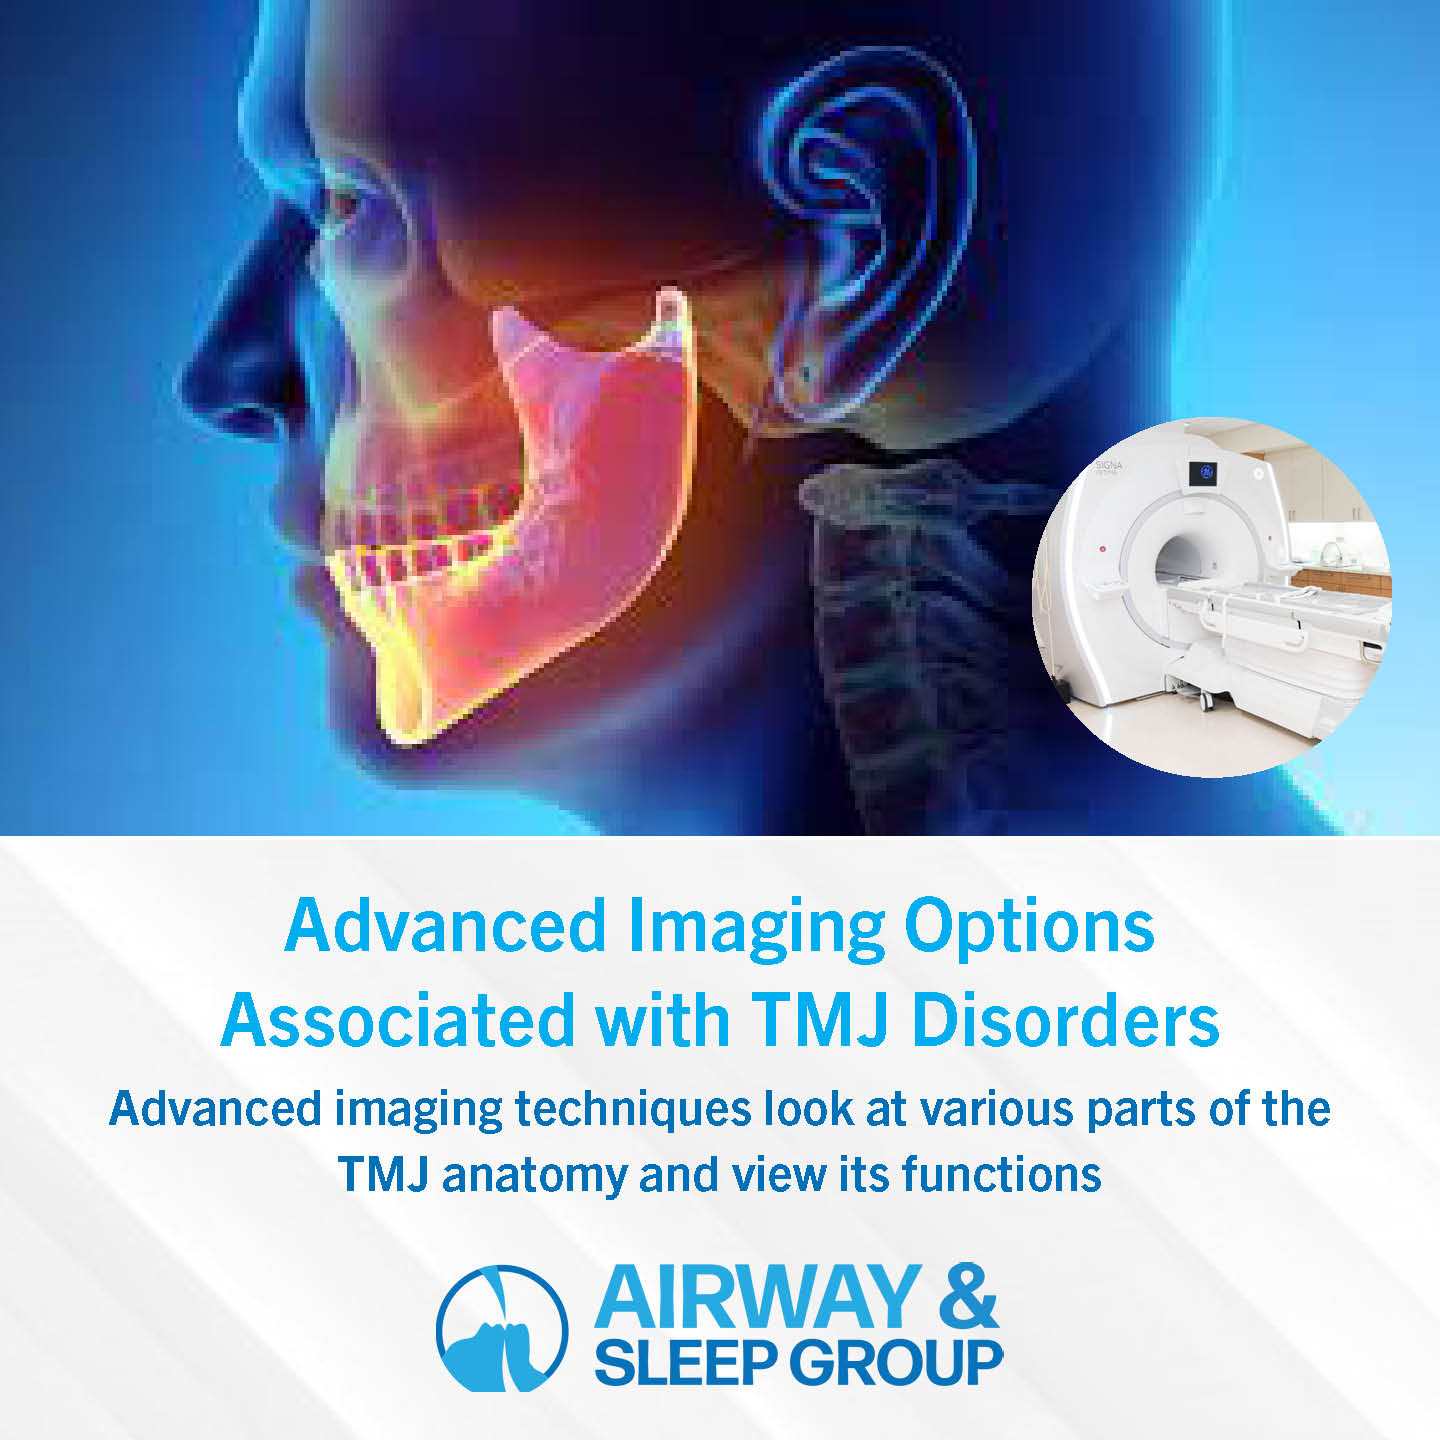 Advanced imaging options associated with TMJ disorders - Infographic